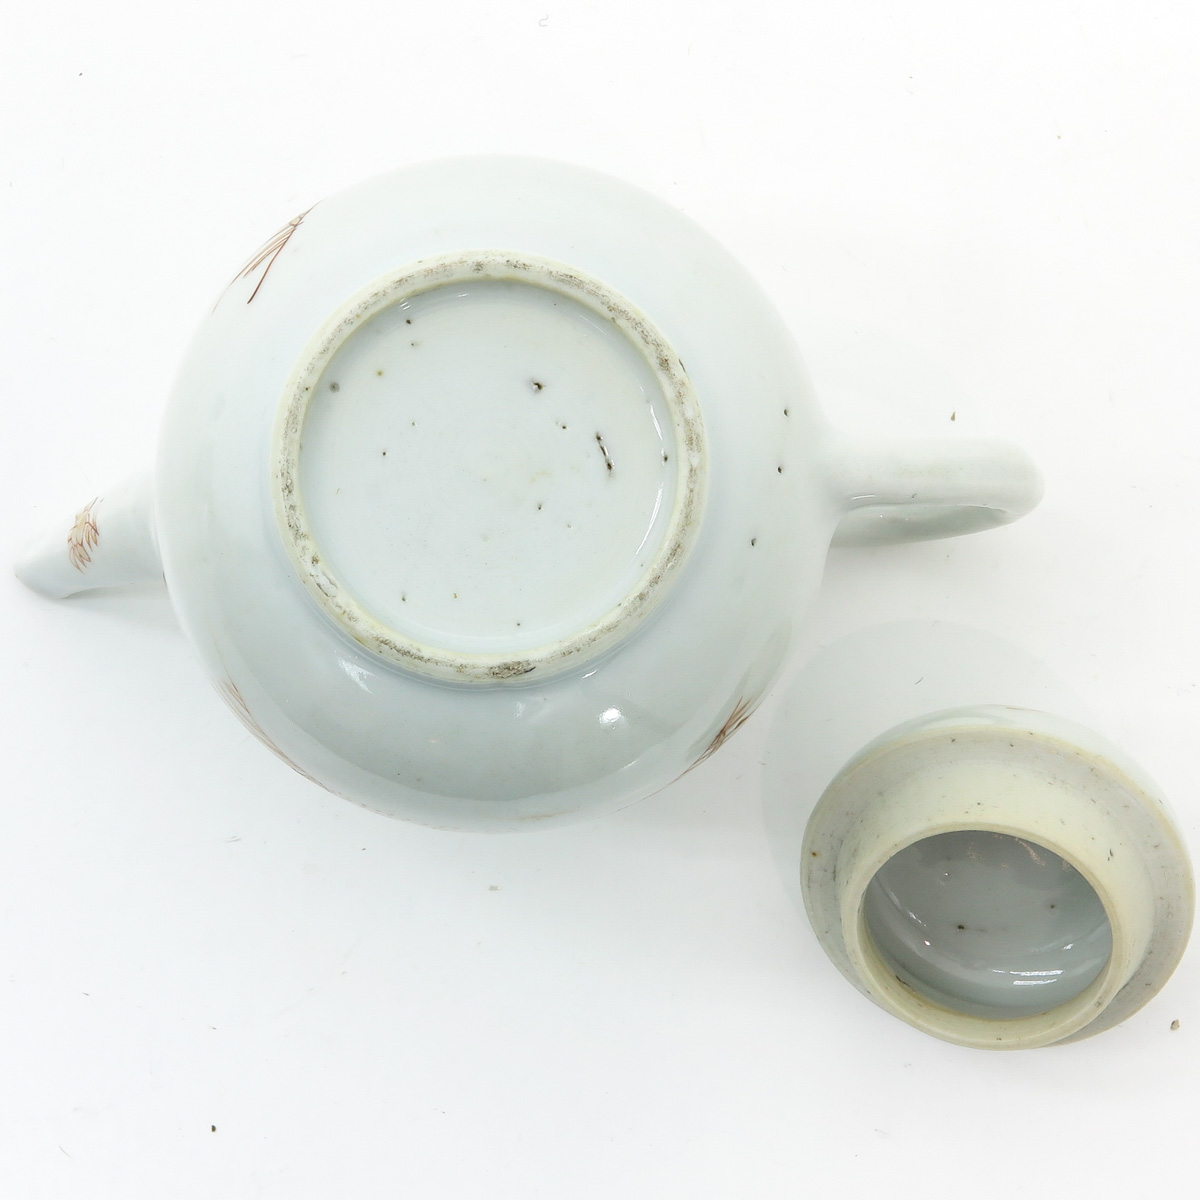 A Chinese Teapot - Image 6 of 6